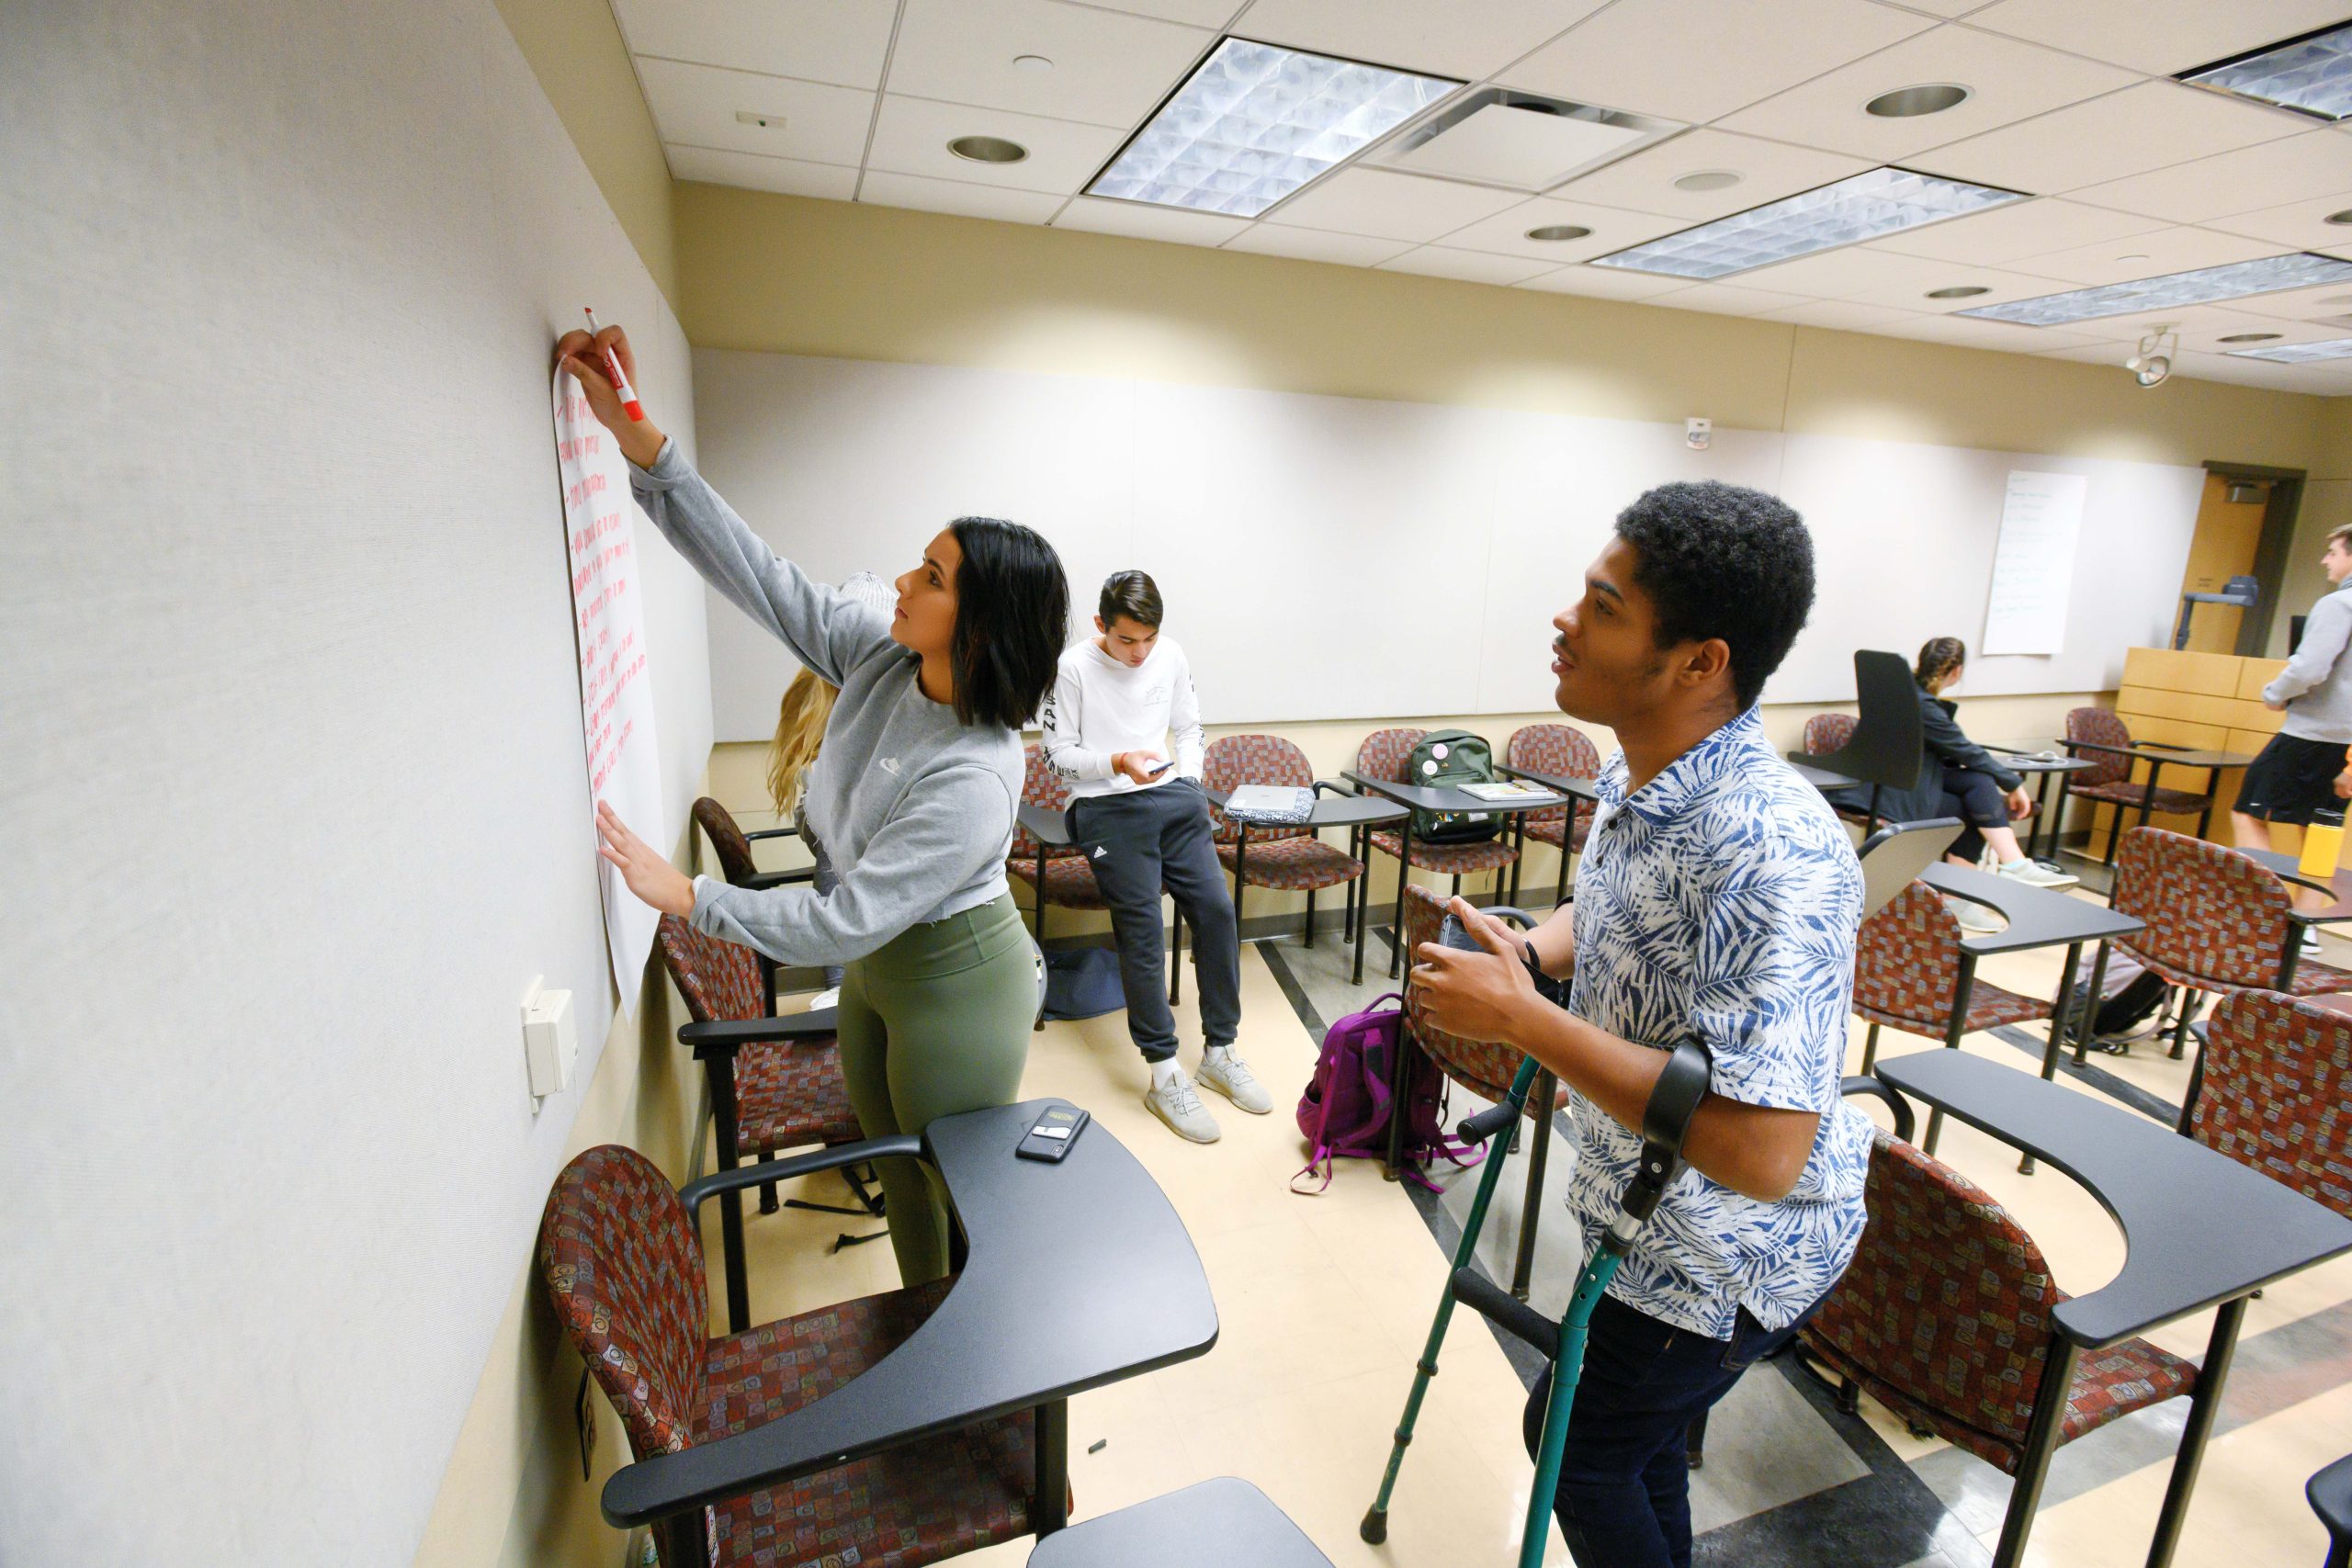 A group of three students attaching a large sheet of paper to a white wall. The paper contains handwritten notes in red ink. Two more students are in the background, talking to each other.